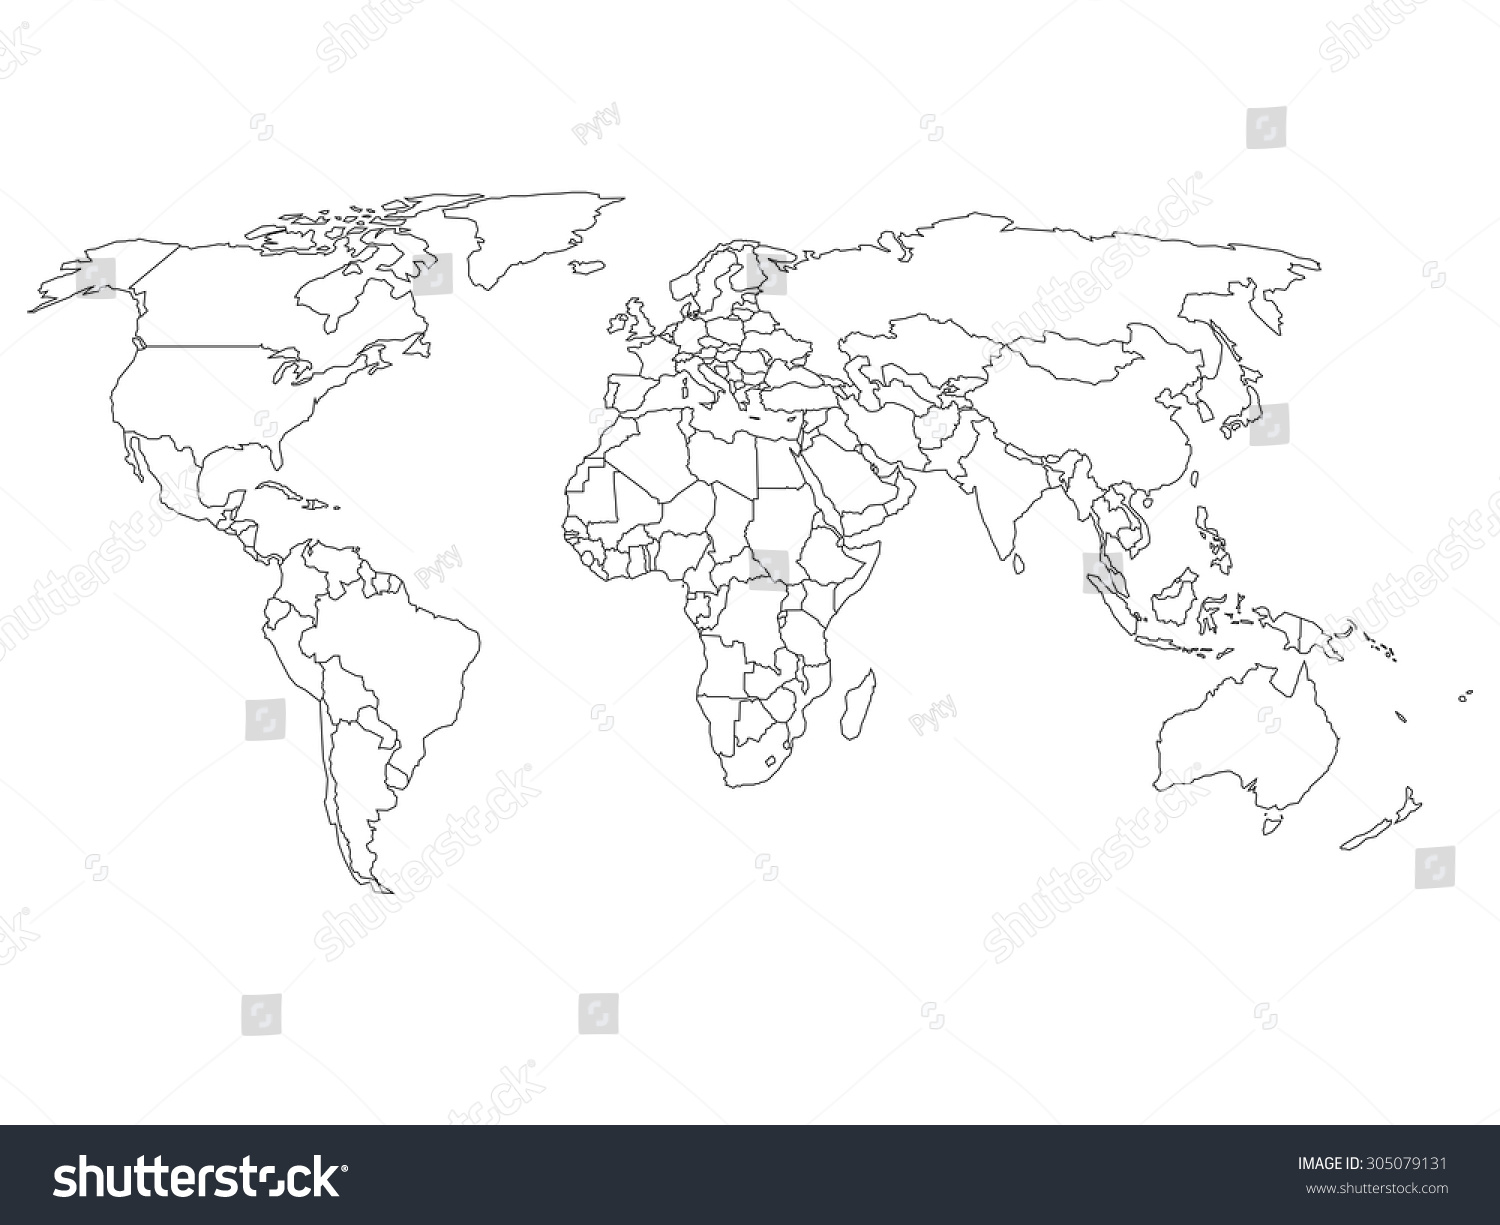 World map with country borders, thin black outline on white background #305079131